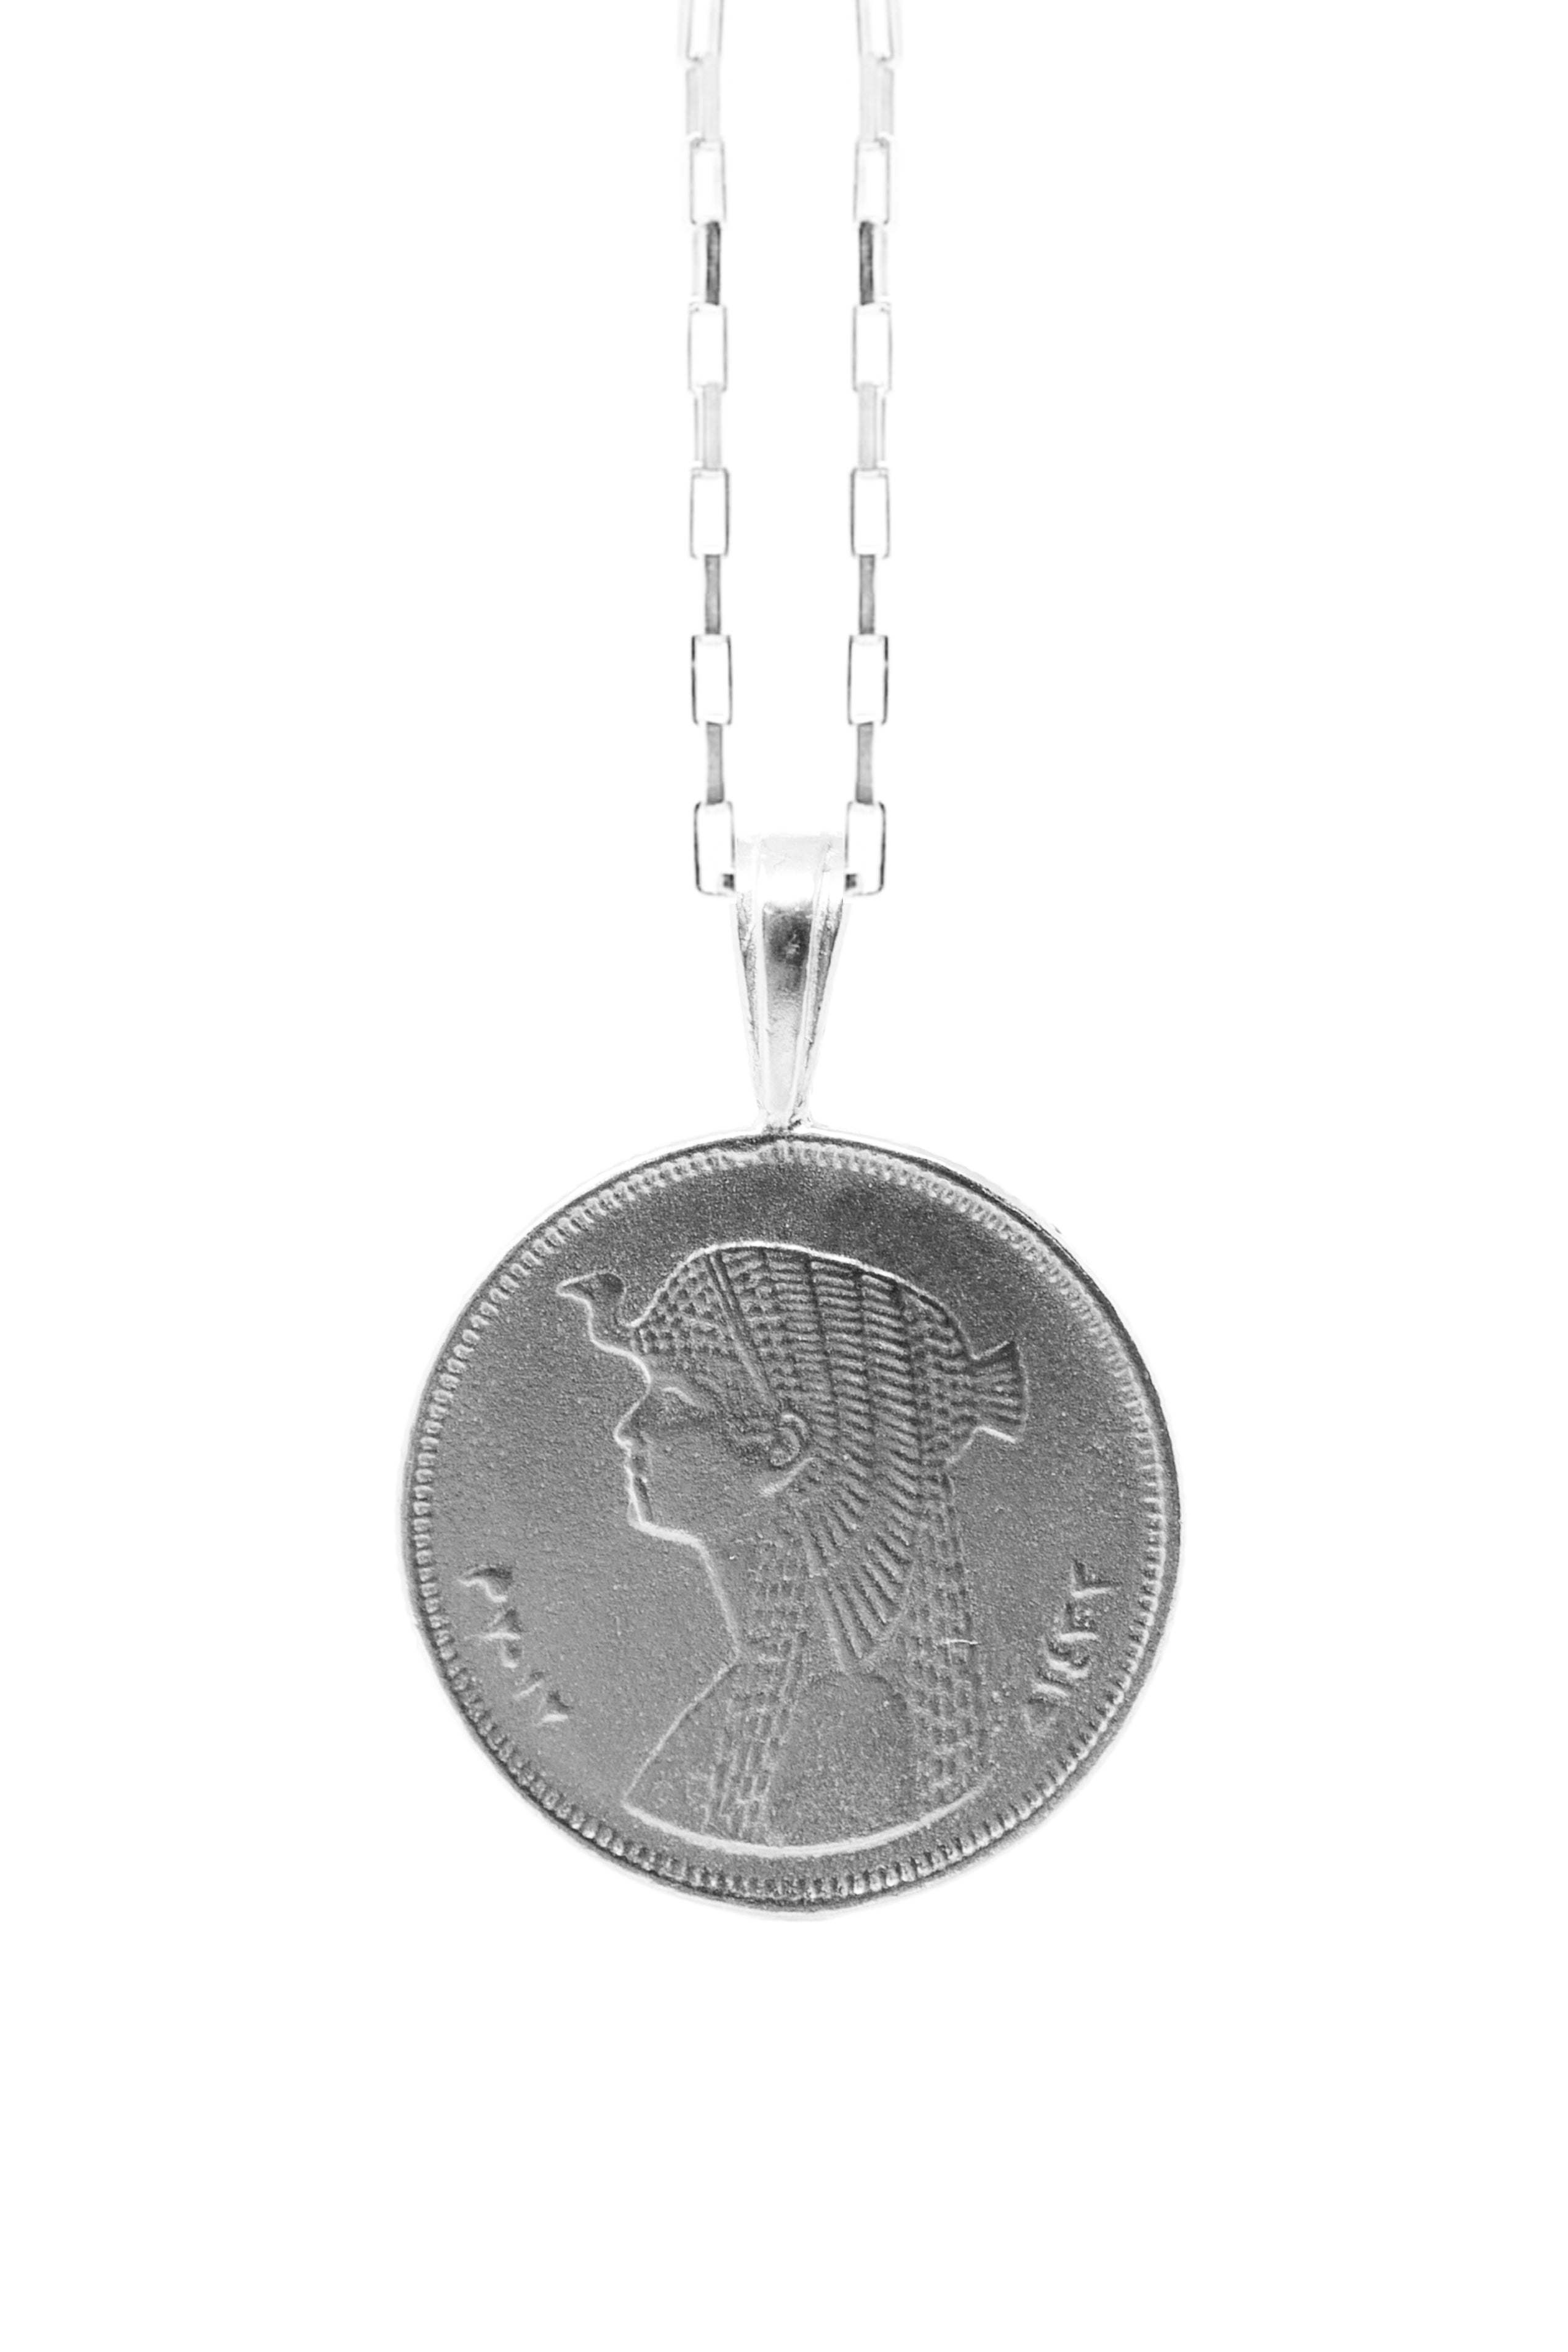 1974 Half Dollar Coin Necklace, 50th Birthday Gift for Her, Thoughtful  Meaningful Custom 50th Anniversary Gift for Grandma, Mom, Wife Sister - Etsy